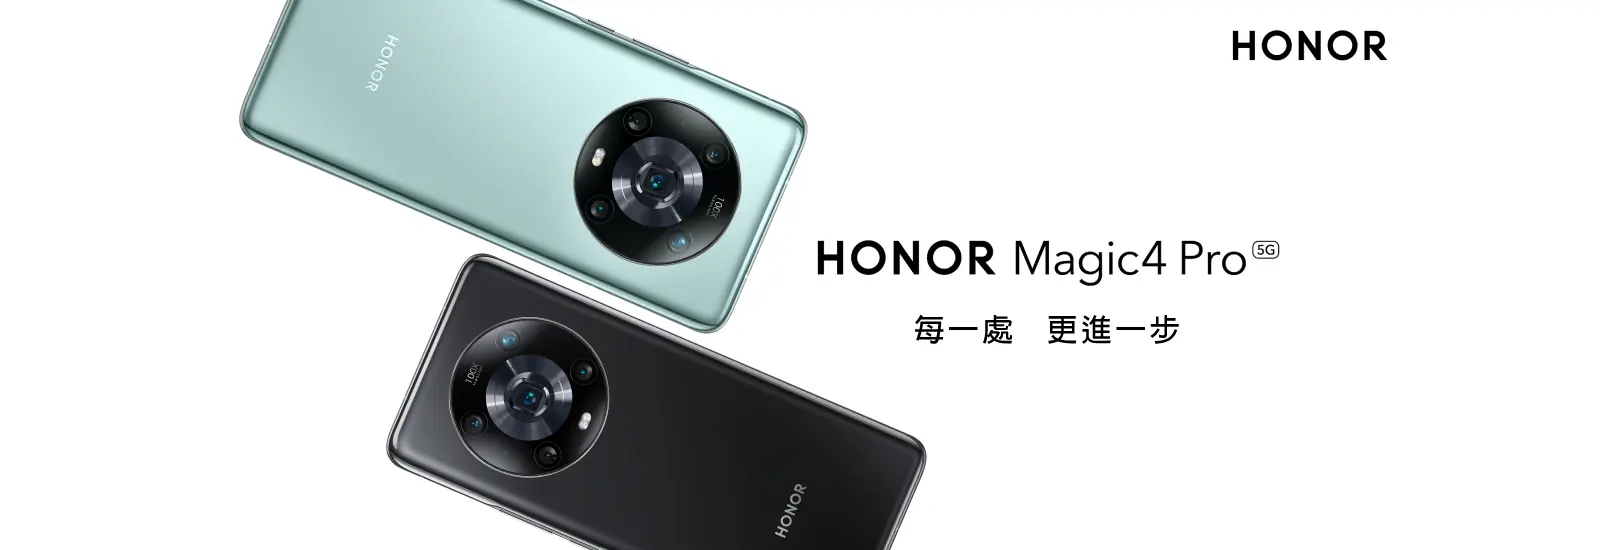 $0 Handset price, monthly fee $348 to enjoy HONOR Magic4 Pro 5G 256GB, Free delivery.